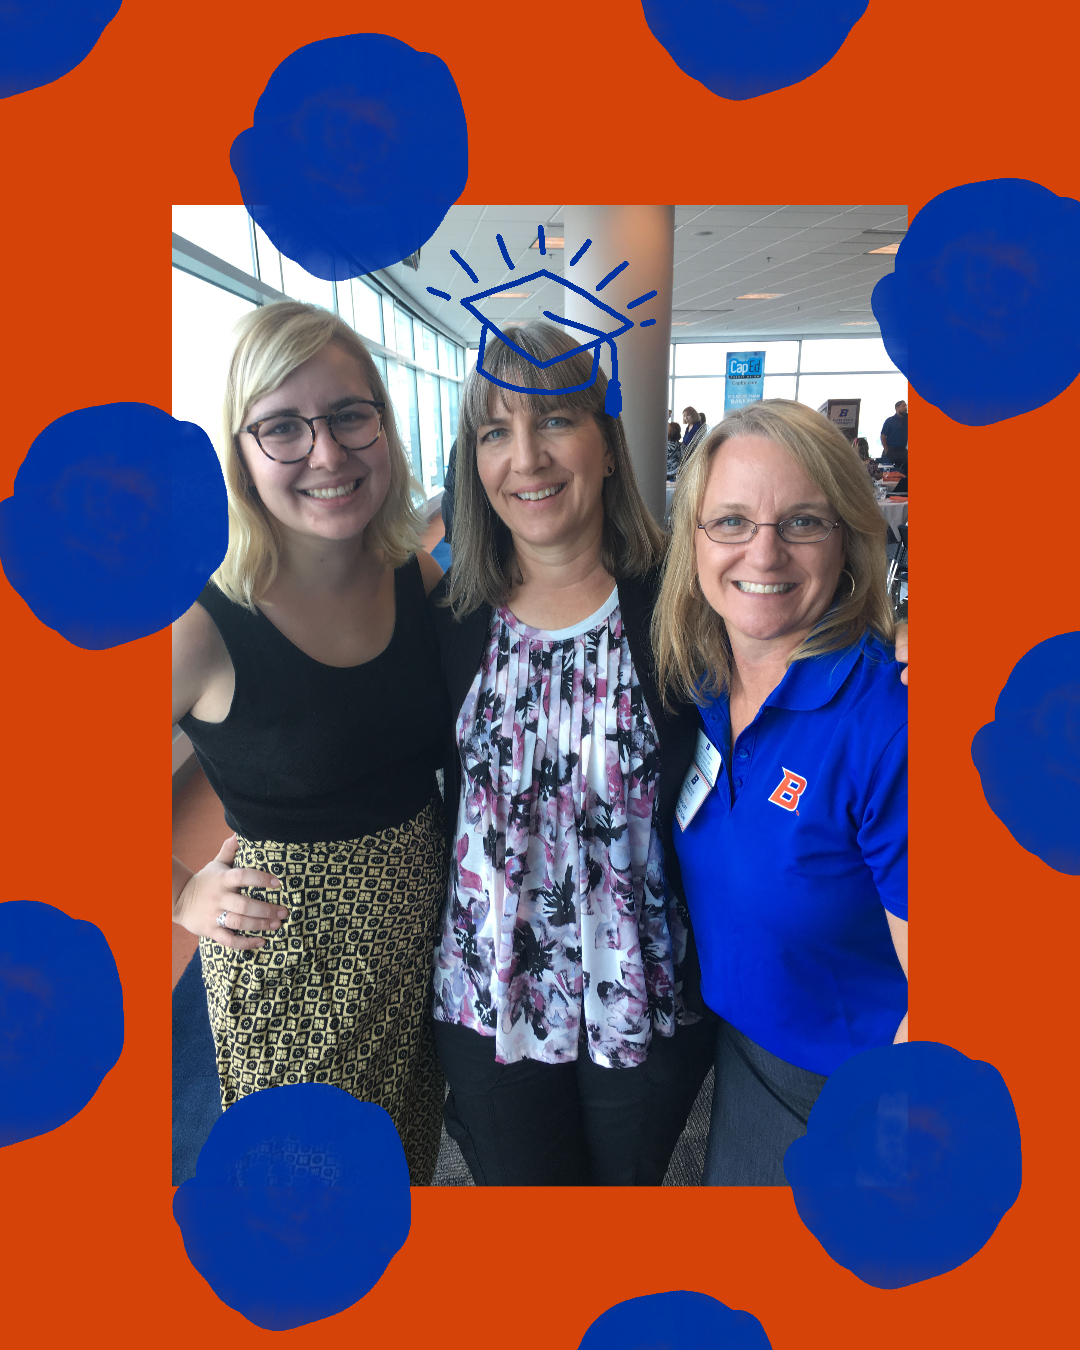 Kati Searles poses with her academic advisor and her daughter